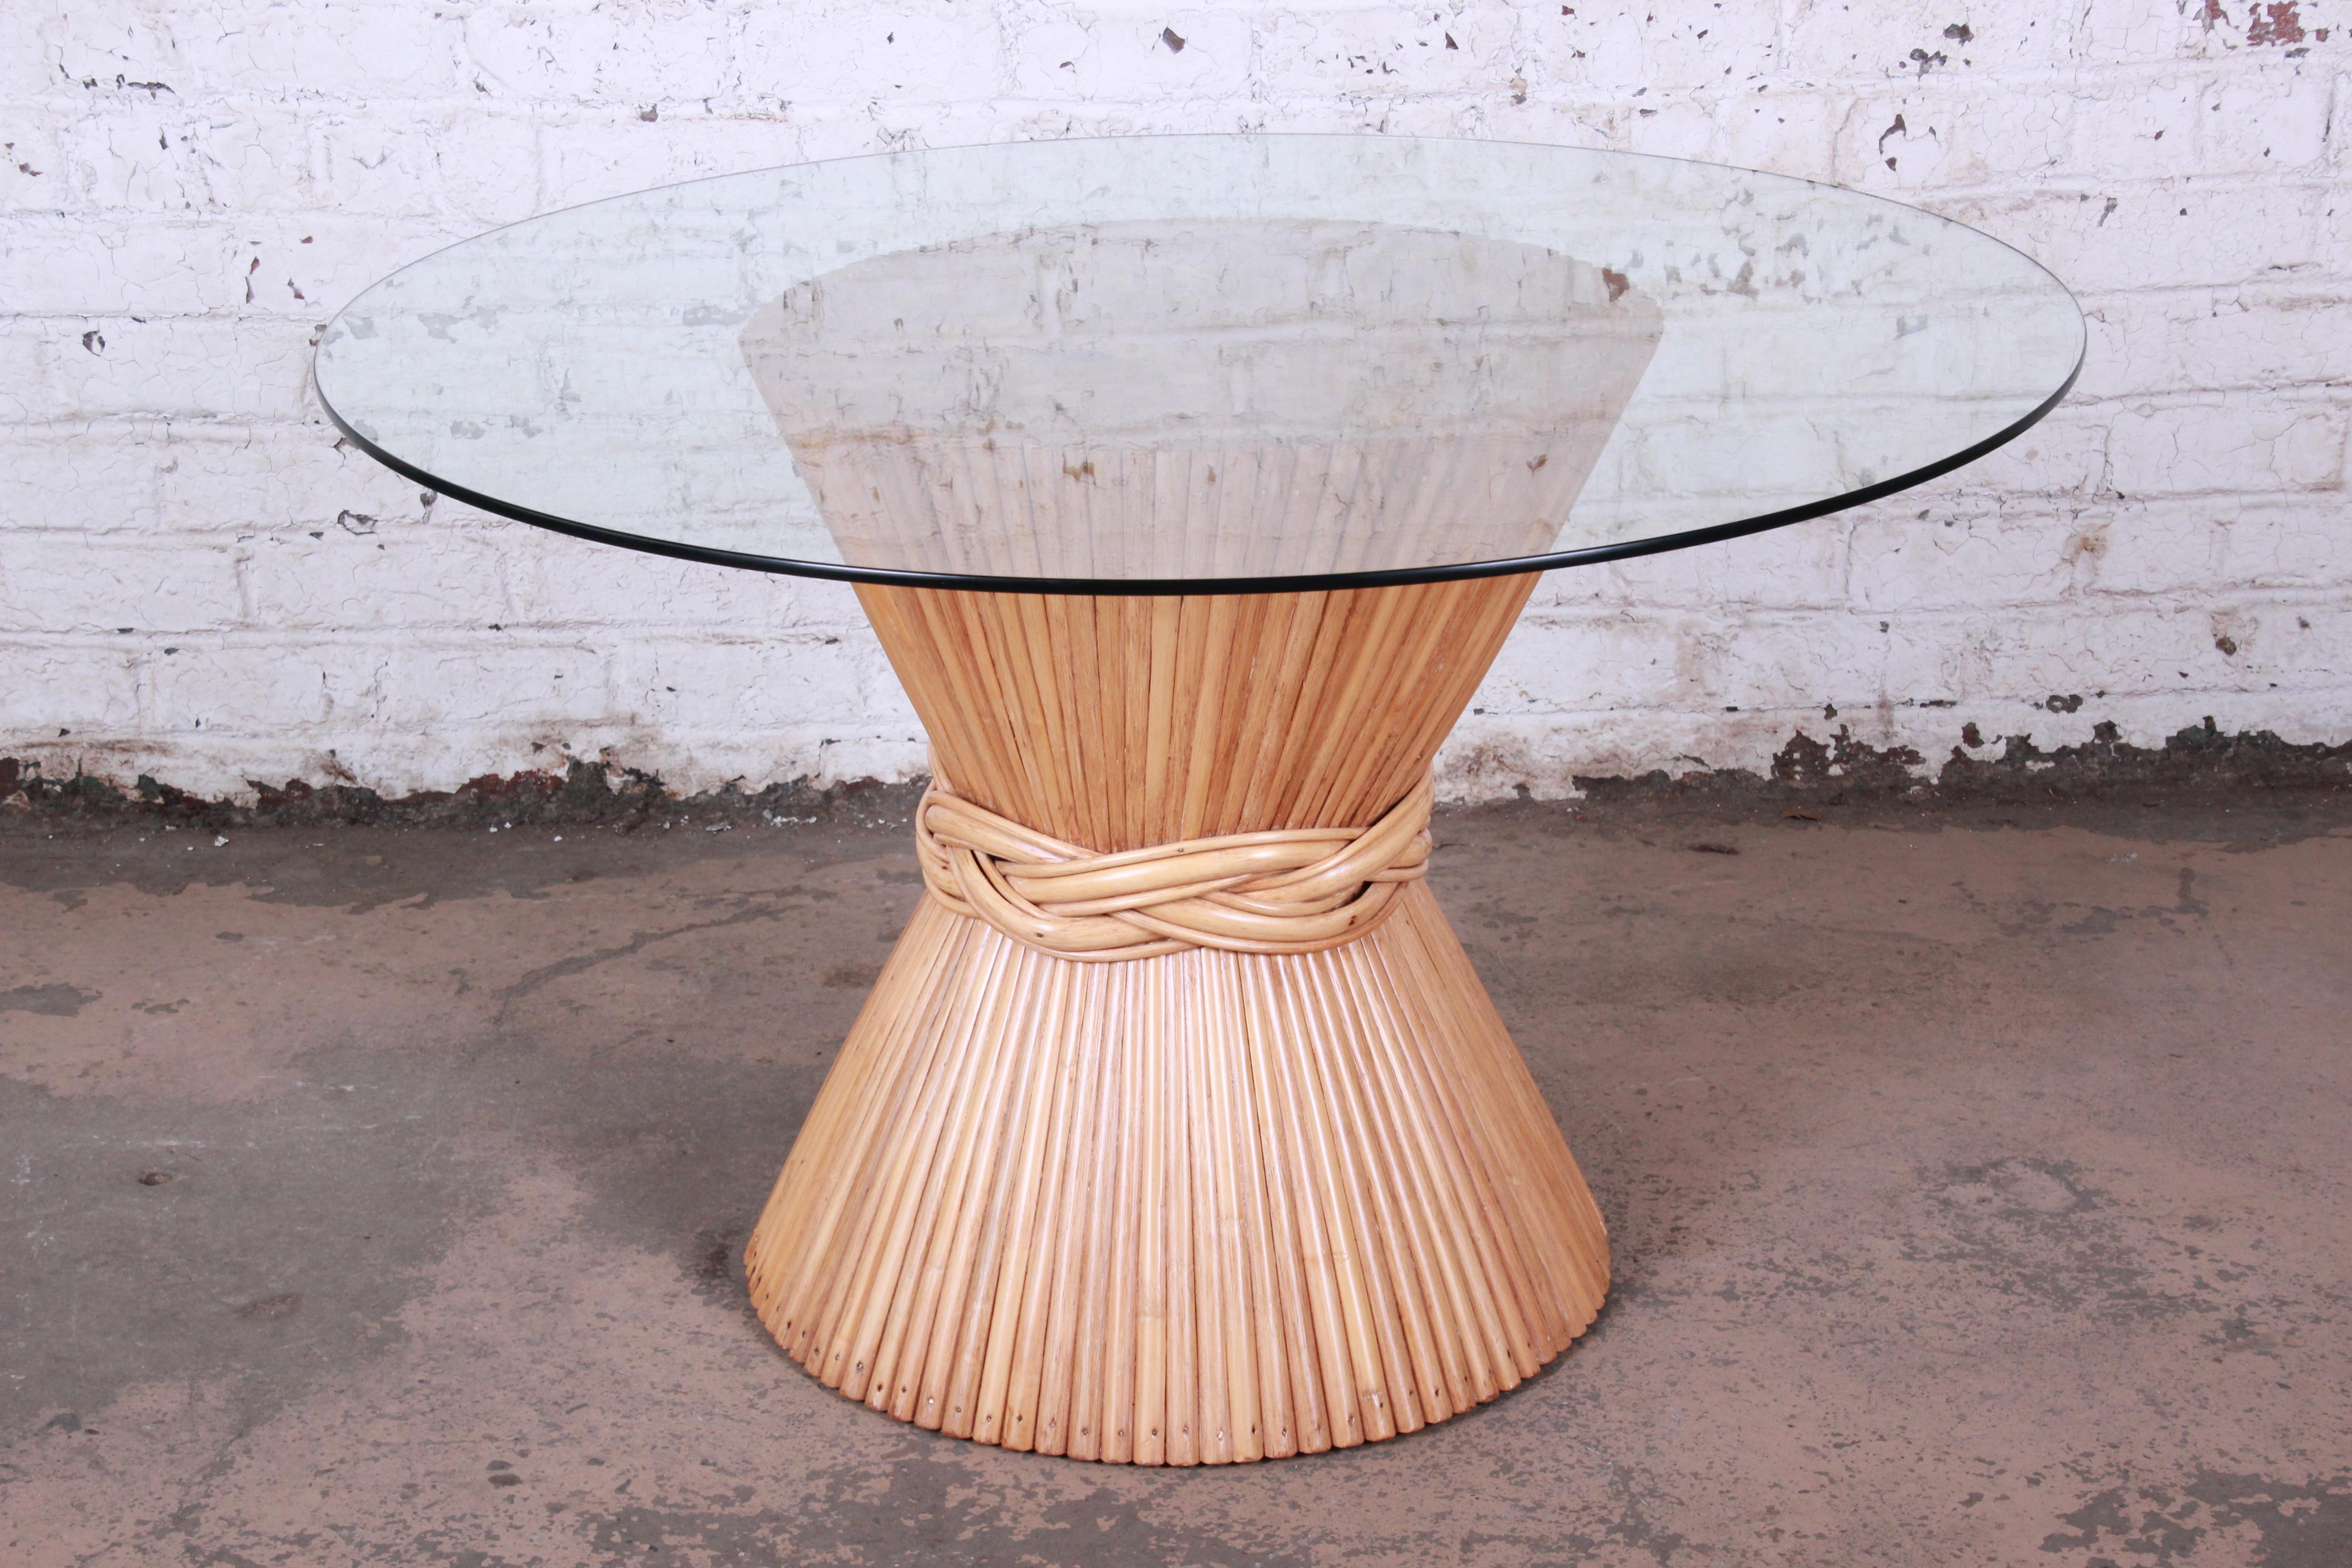 Offering a very nice McGuire bamboo pedestal dining table with a round glass top. The table has a unique ribbon weave design at the center of a sheaf of wheat base. The base has been re-lacquered giving it a nice fresh look while maintaining its